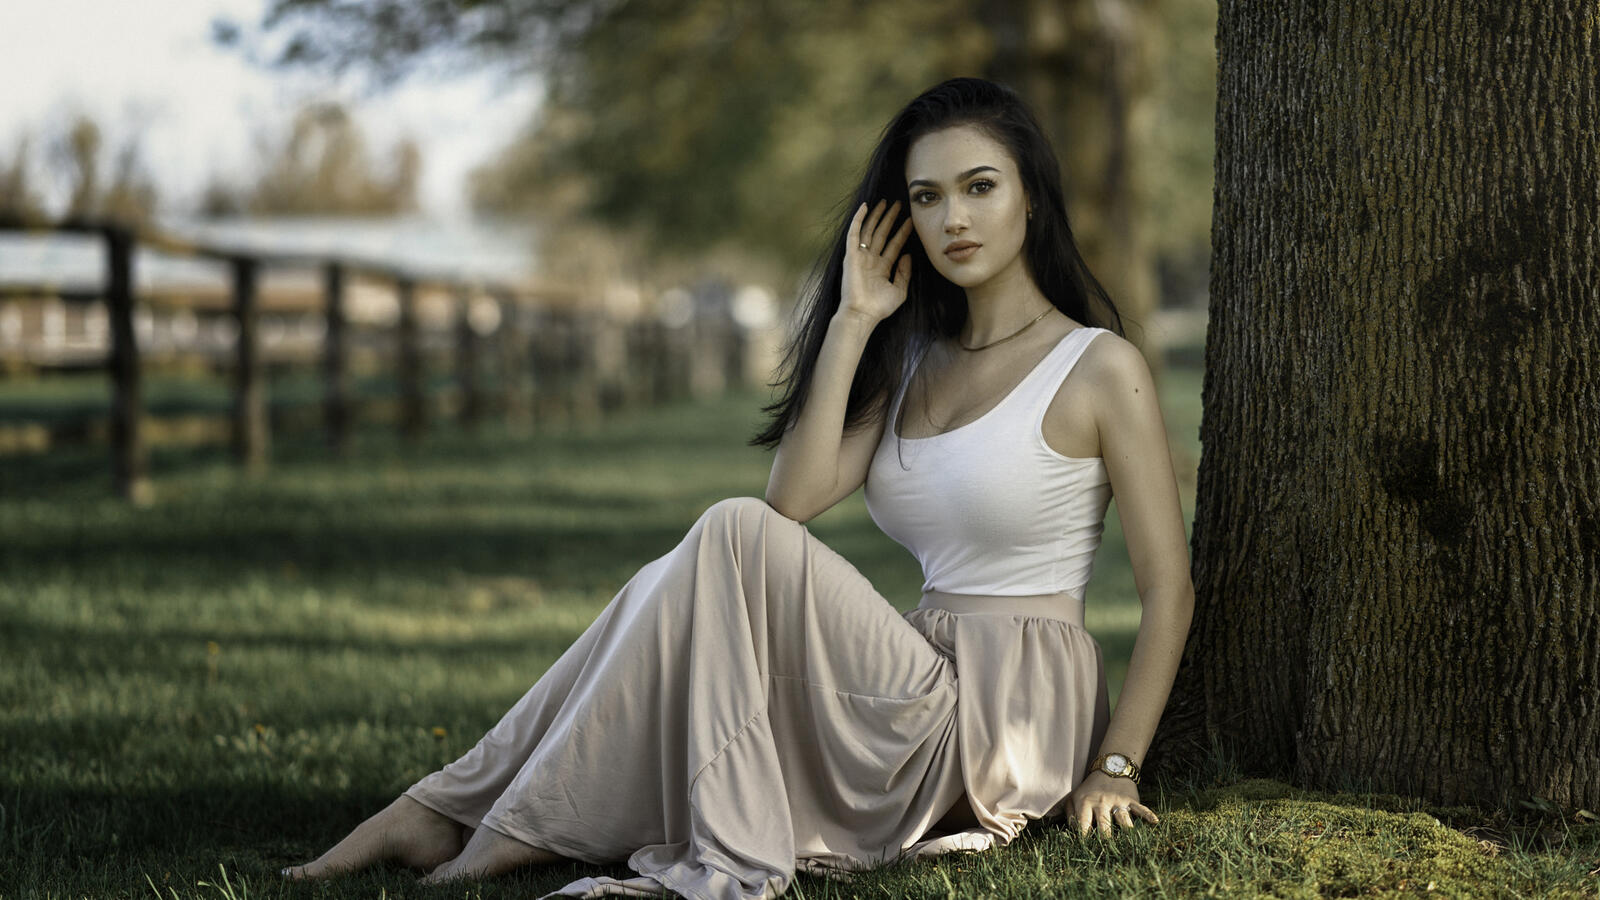 Free photo A dark-haired girl in a light skirt sits by a tree